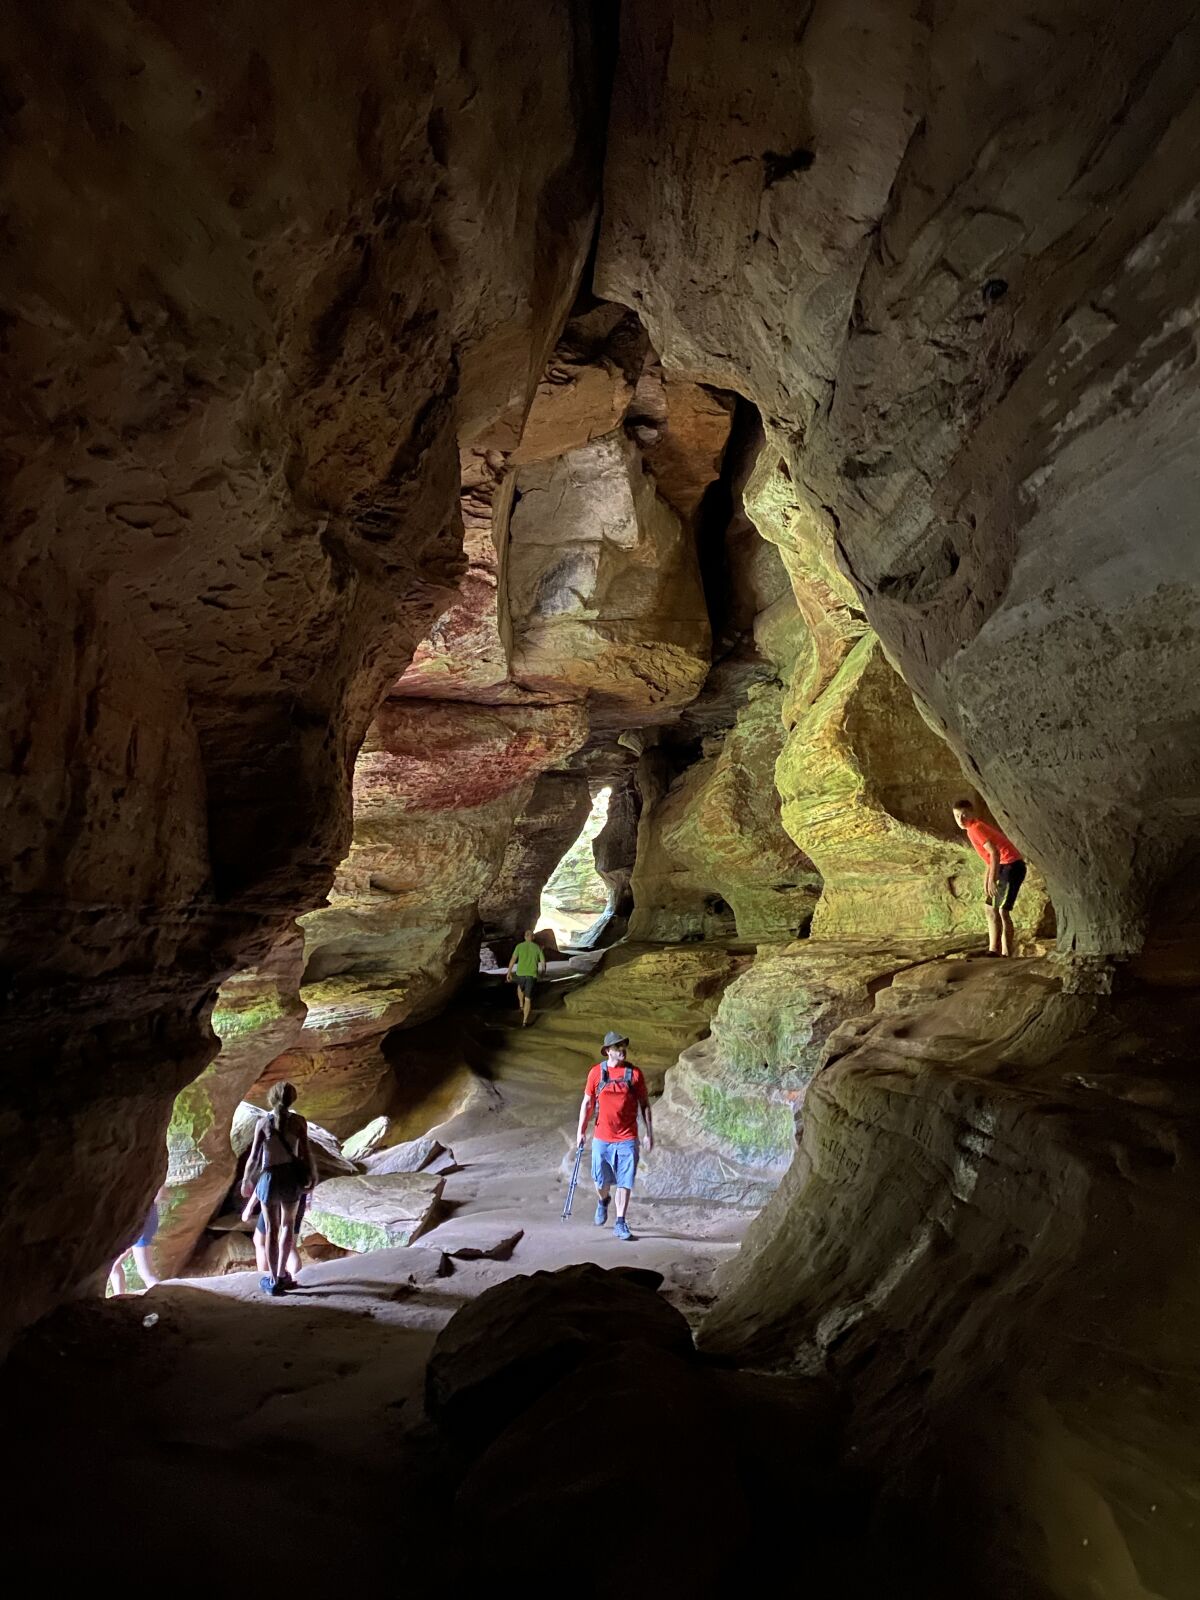 Visitors walk through Rock House, a cave in Hocking Hills State Park with a 200-foot corridor and 25-foot-high ceilings. 